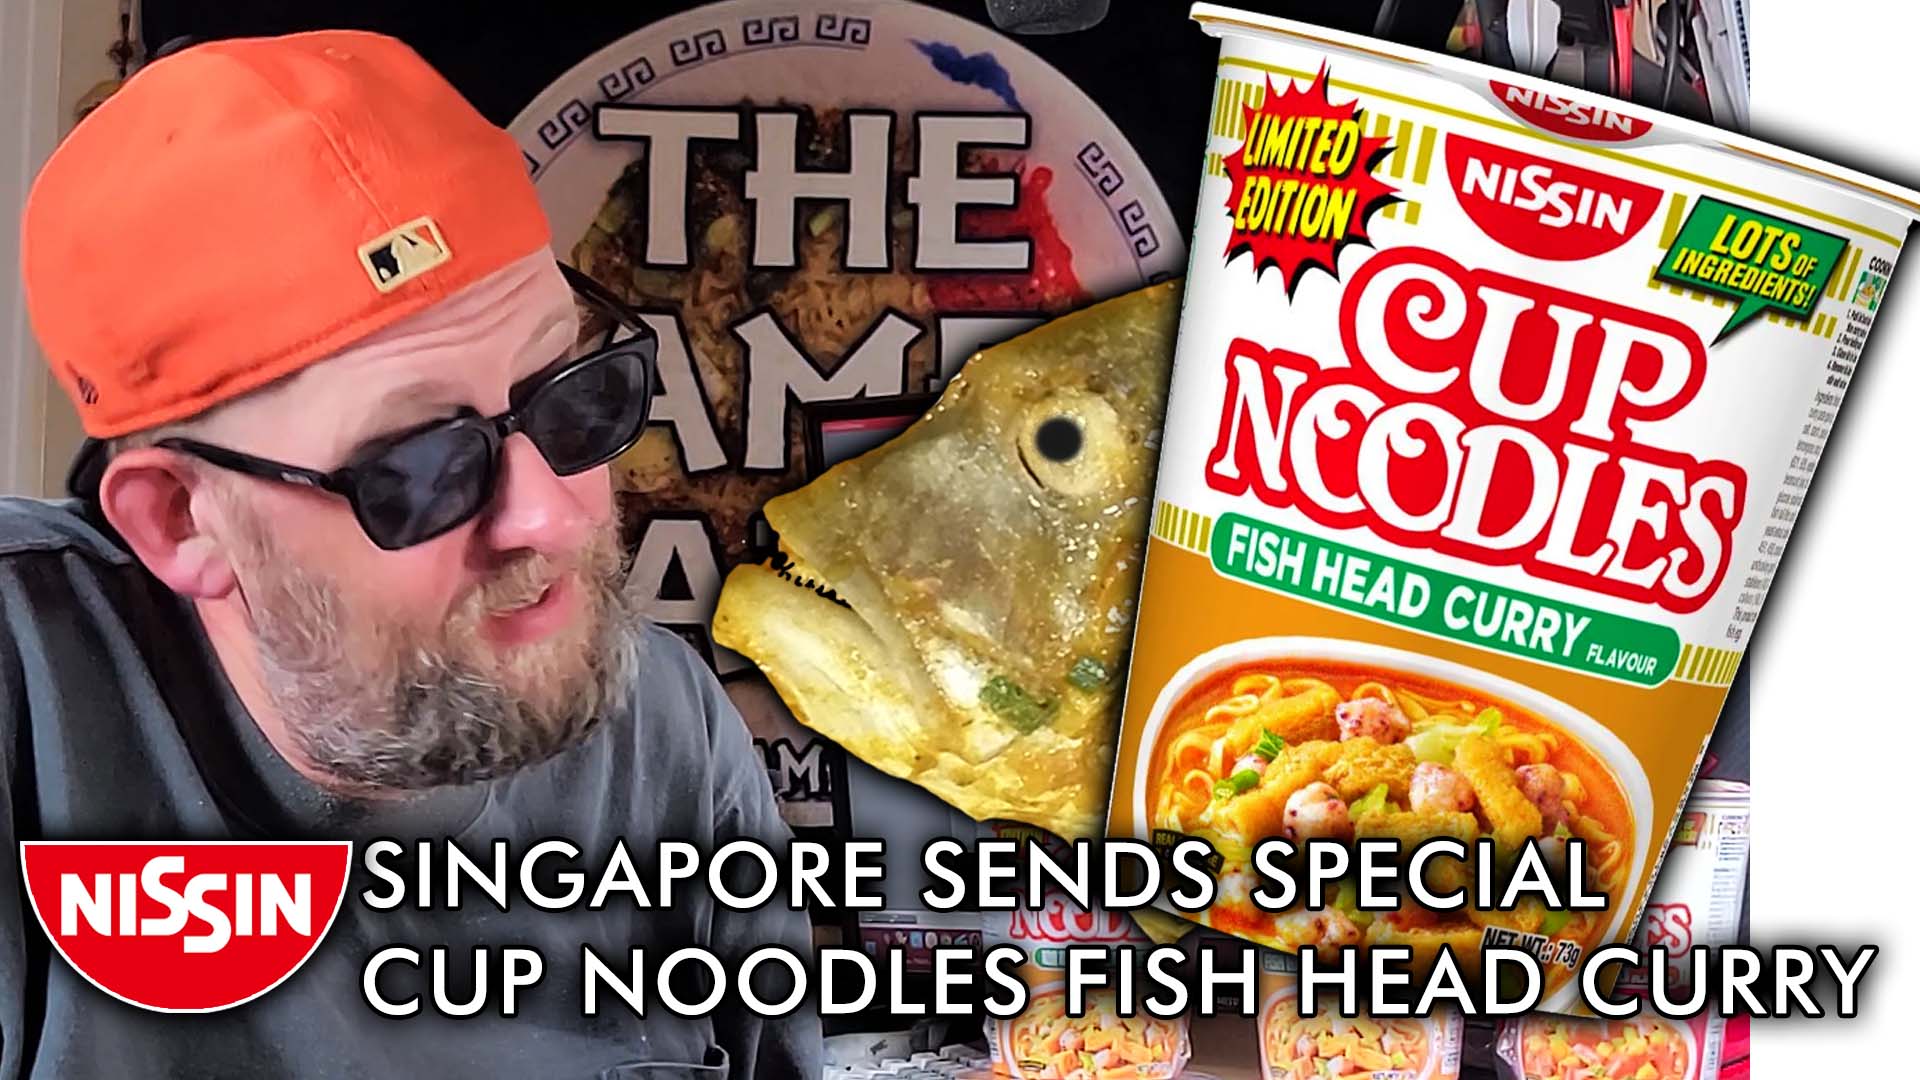 Limited Cup Noodles Fish Head Curry From Nissin Singapore! pic